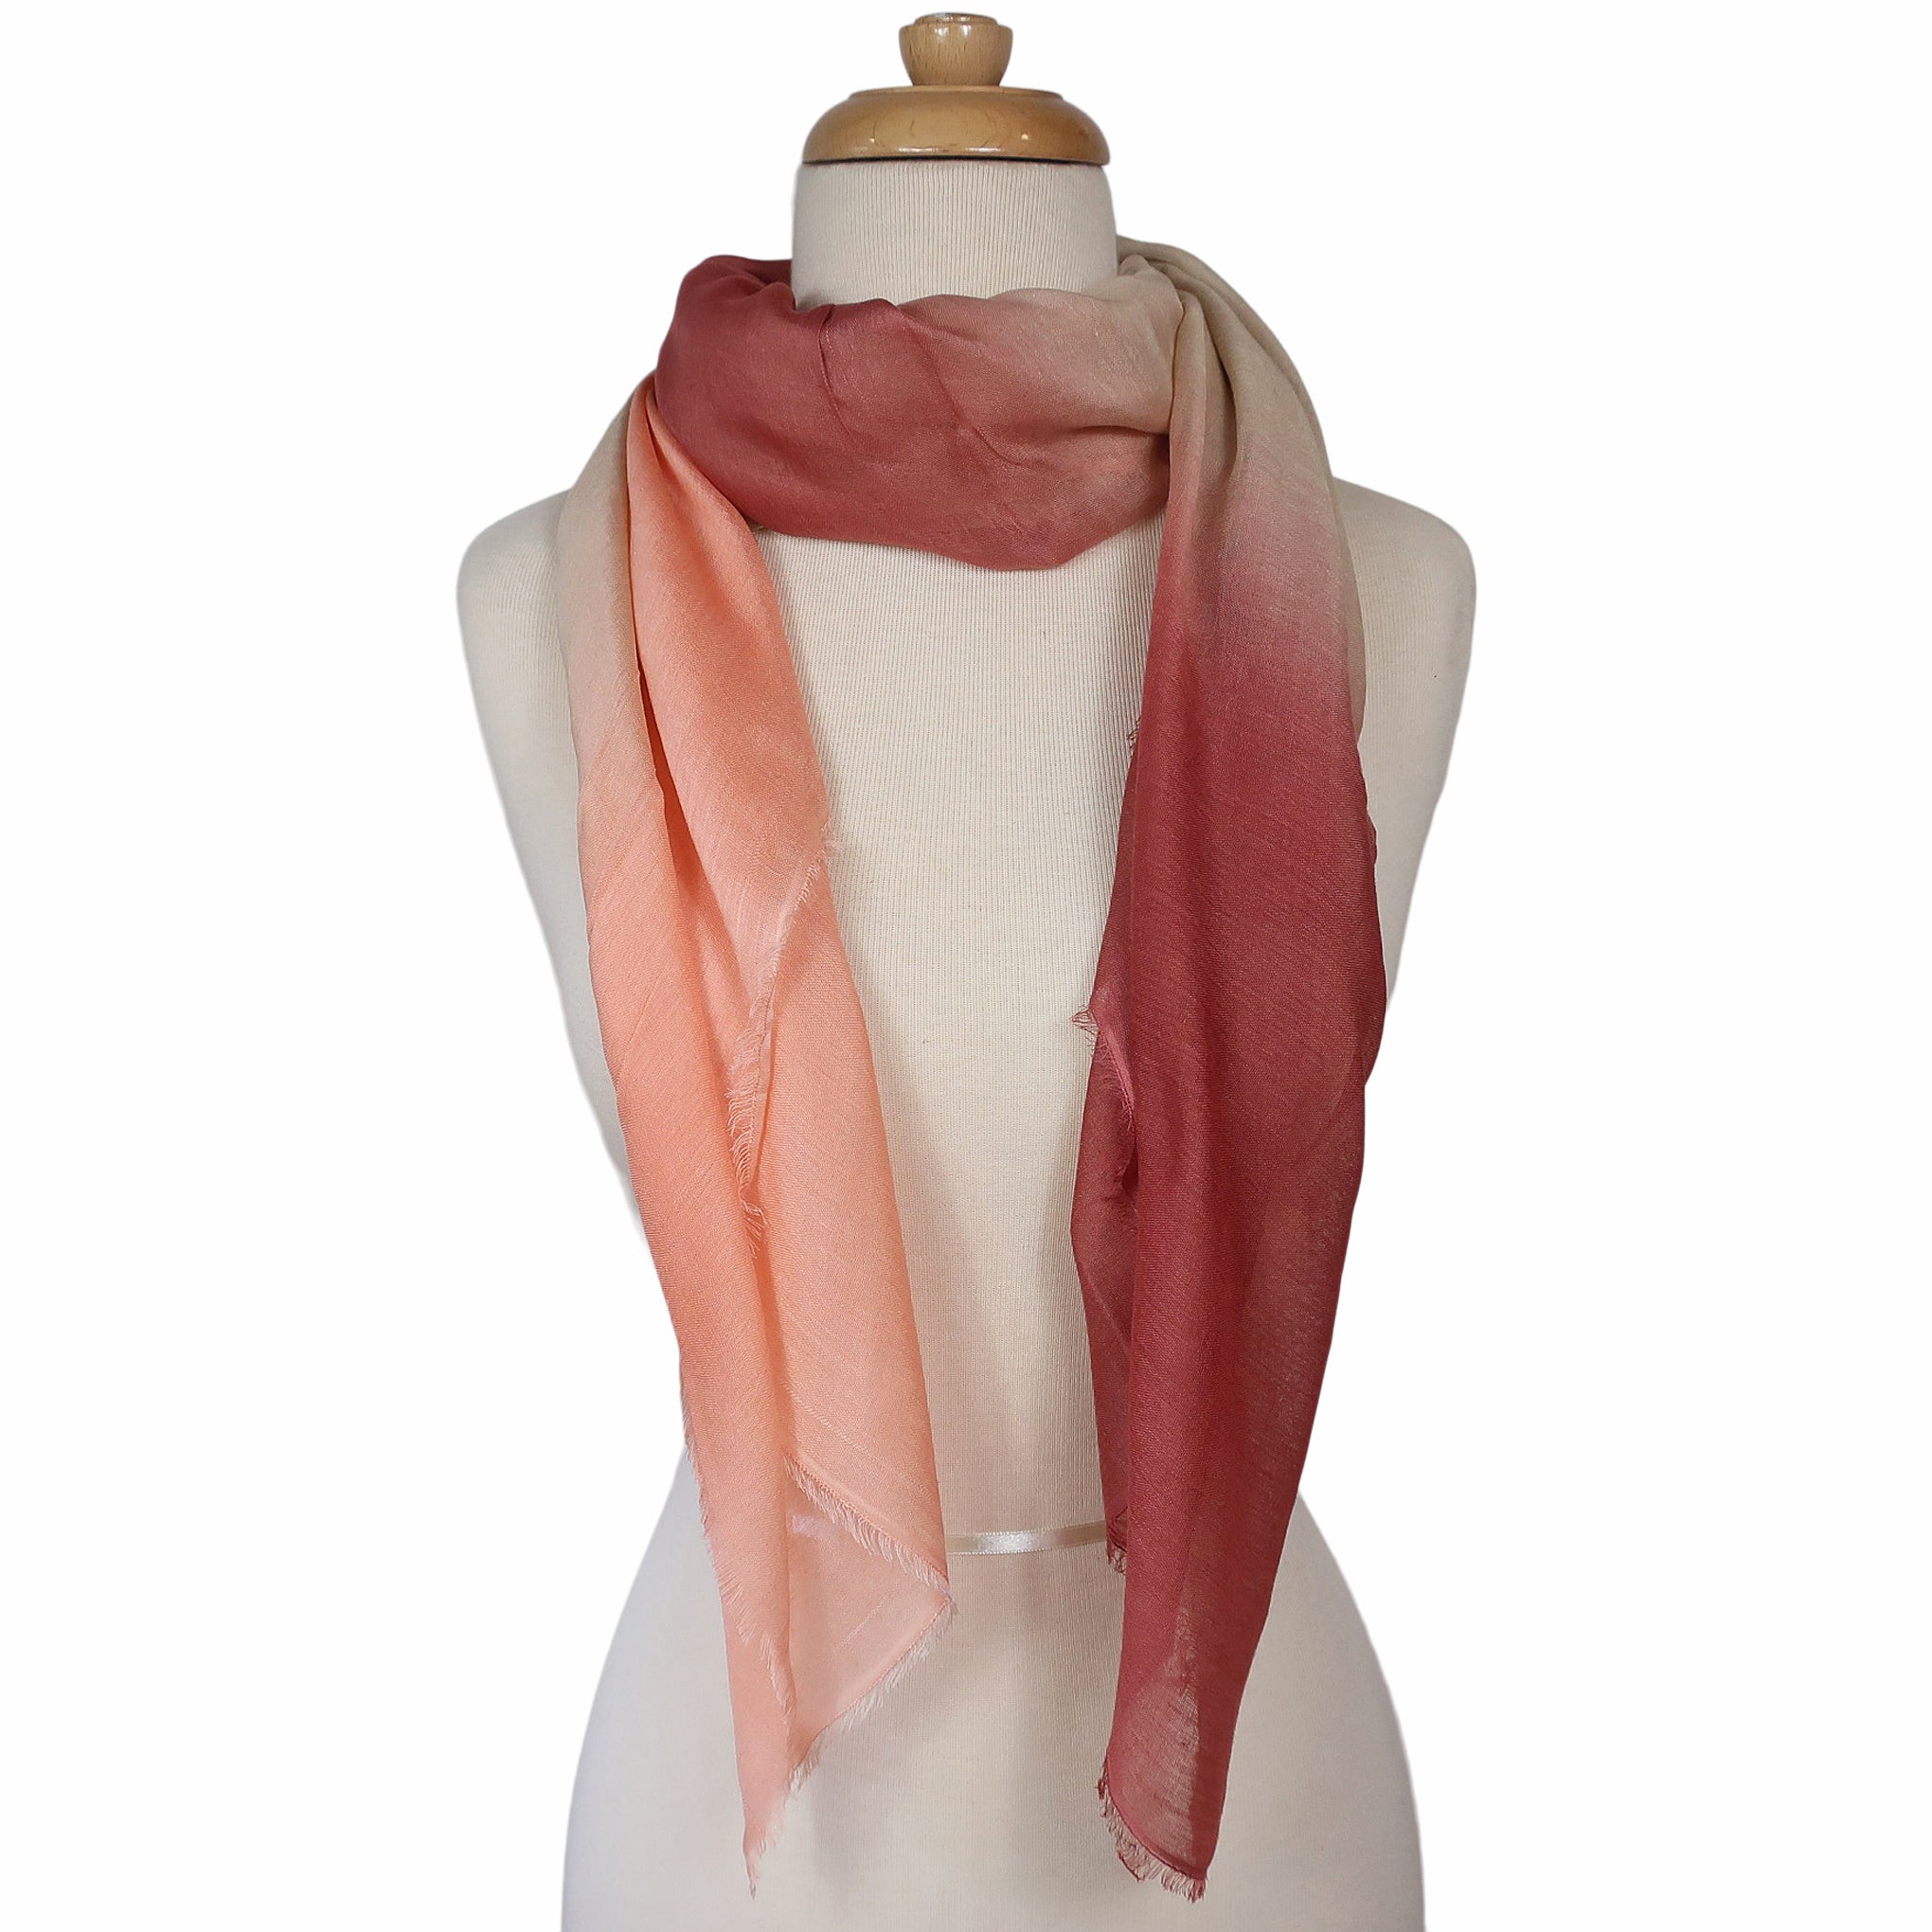 Blue Pacific Dream Cashmere and Silk Scarf in Brown and Tangerine 47 x 37